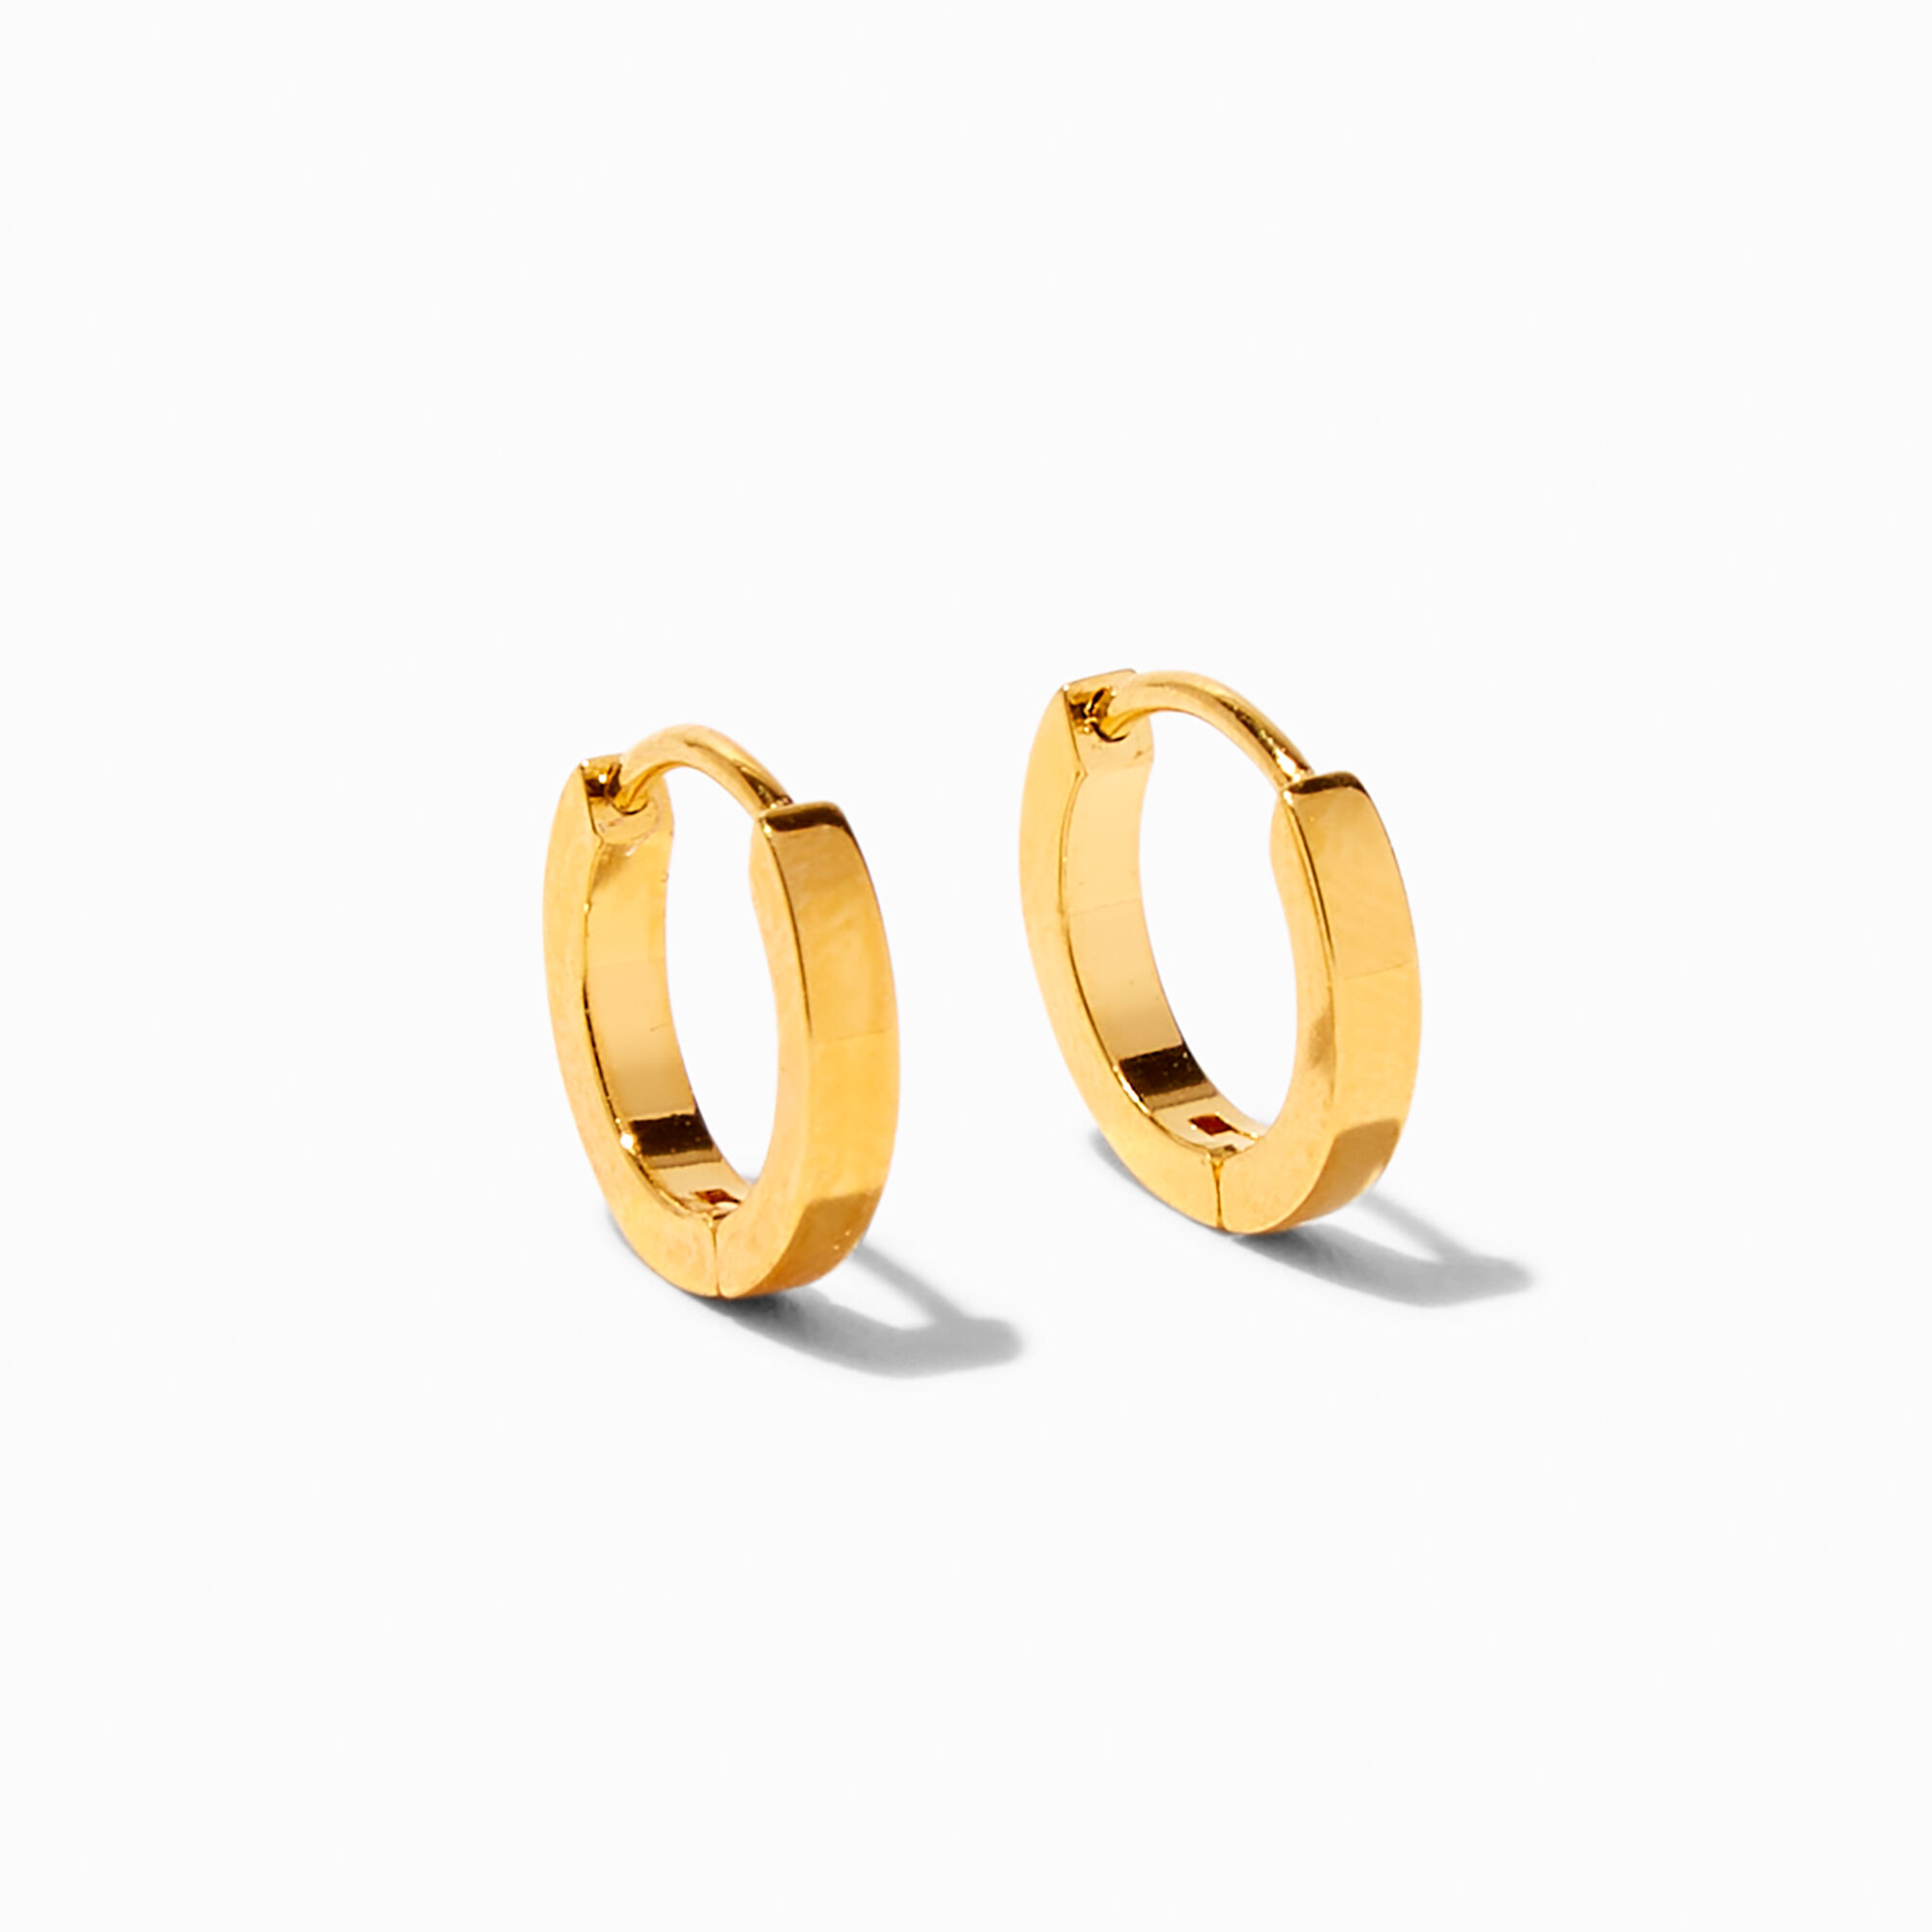 View C Luxe By Claires Titanium 8MM Clicker Hoop Earrings Gold information